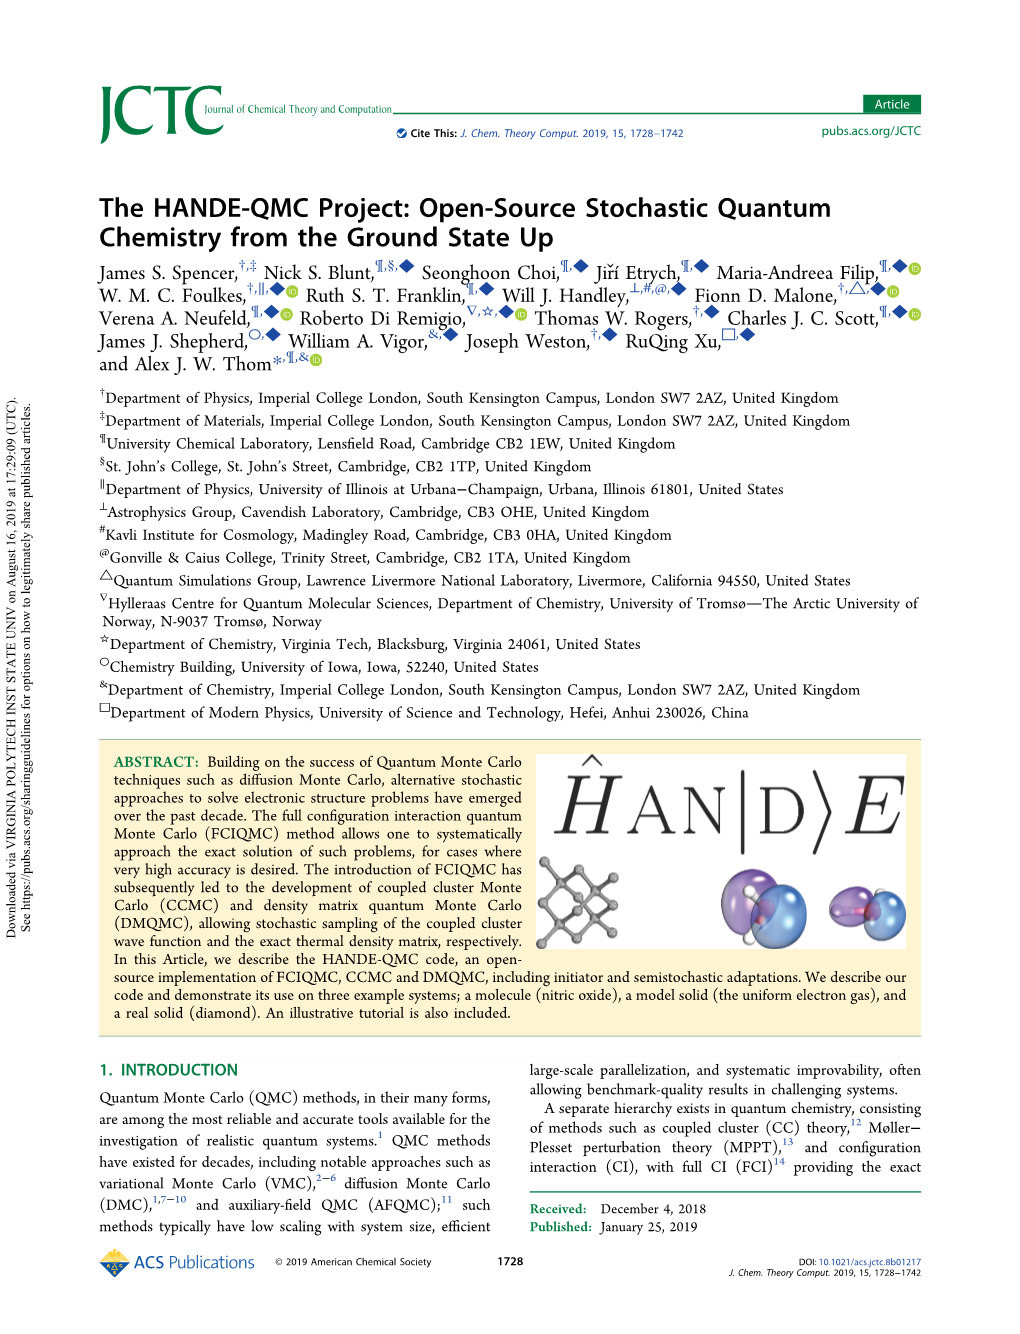 The HANDE-QMC Project: Open-Source Stochastic Quantum Chemistry from the Ground State up † ‡ ¶ § ◆ ¶ ◆ ¶ ◆ ¶ ◆ James S